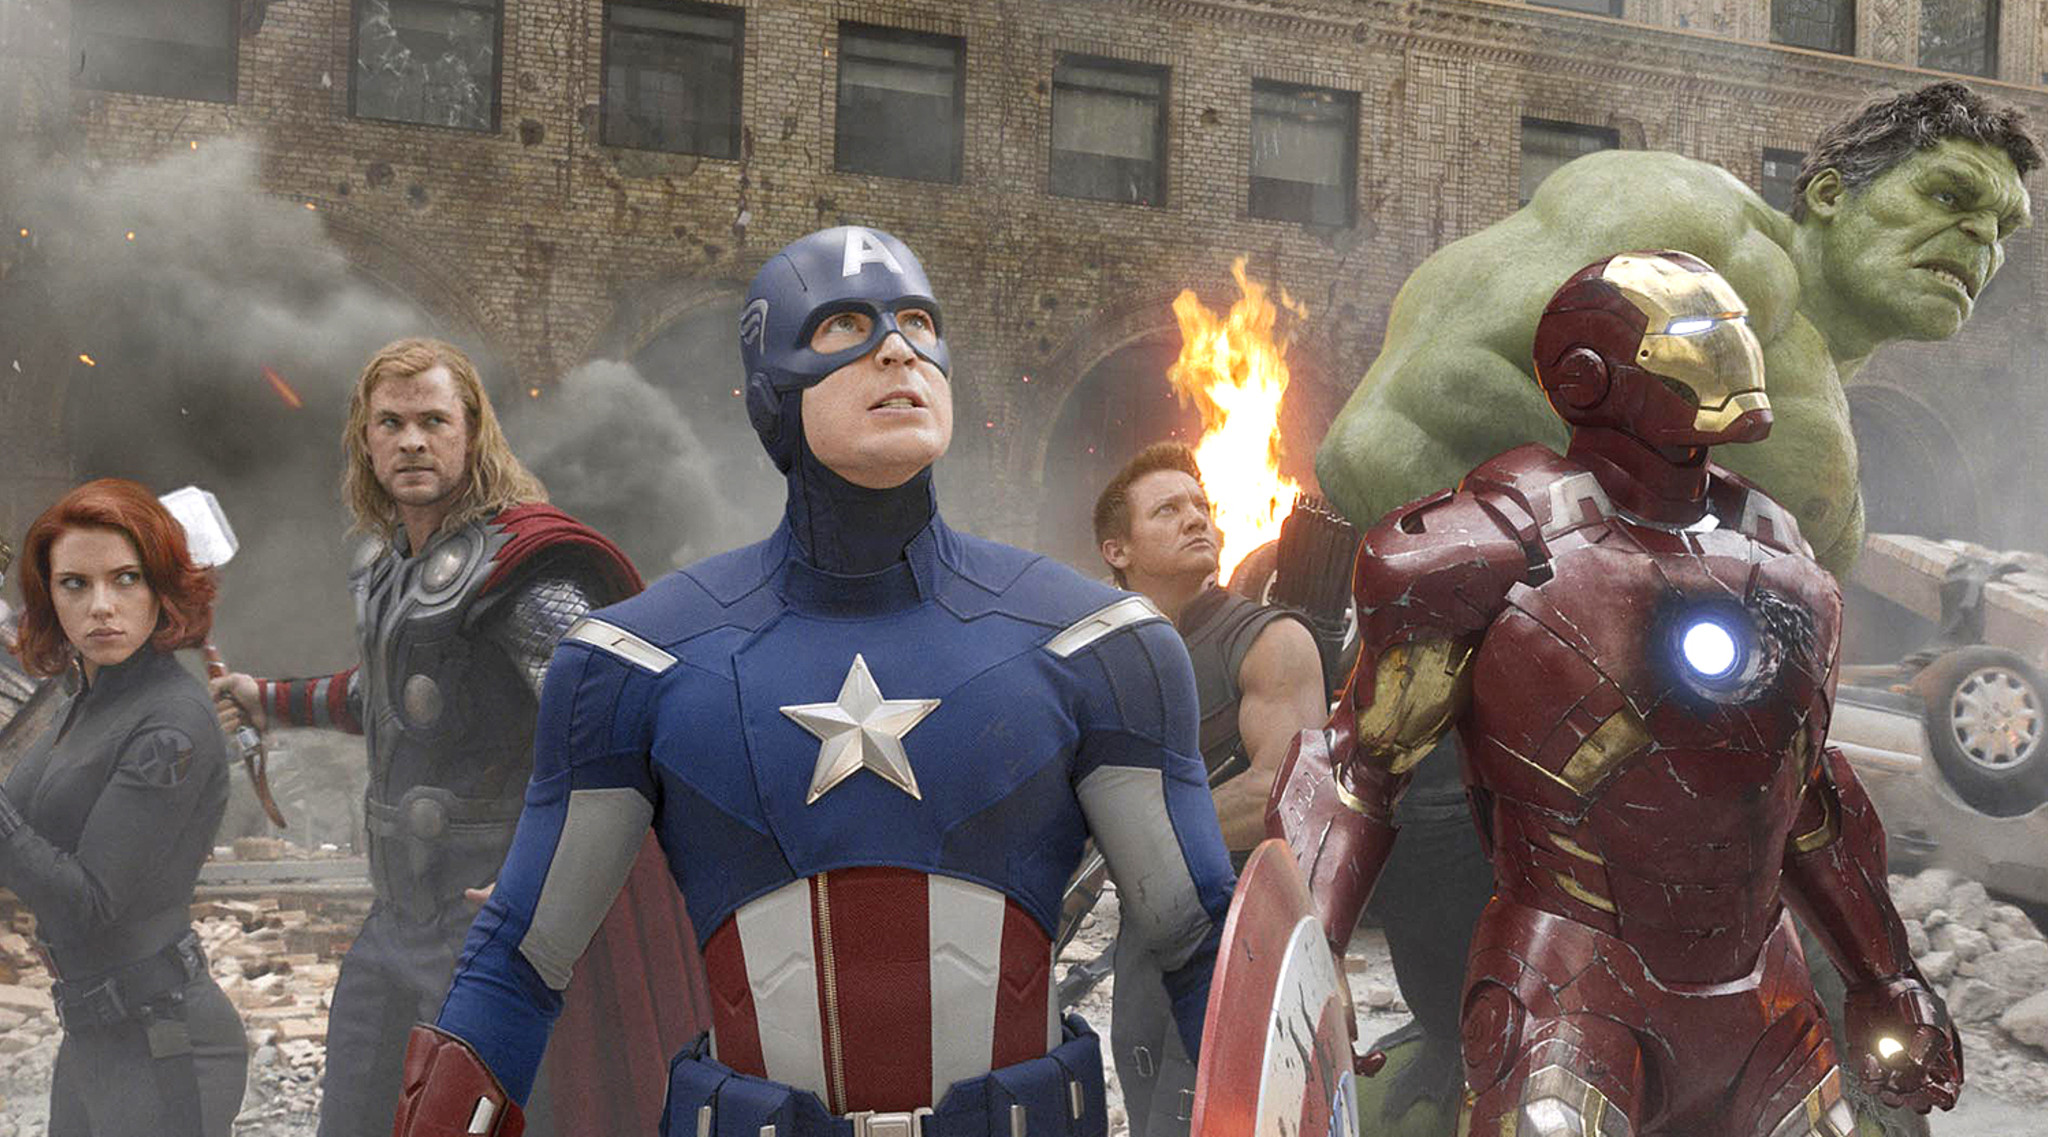 How to Watch ‘The Avengers' on Its 10th Anniversary